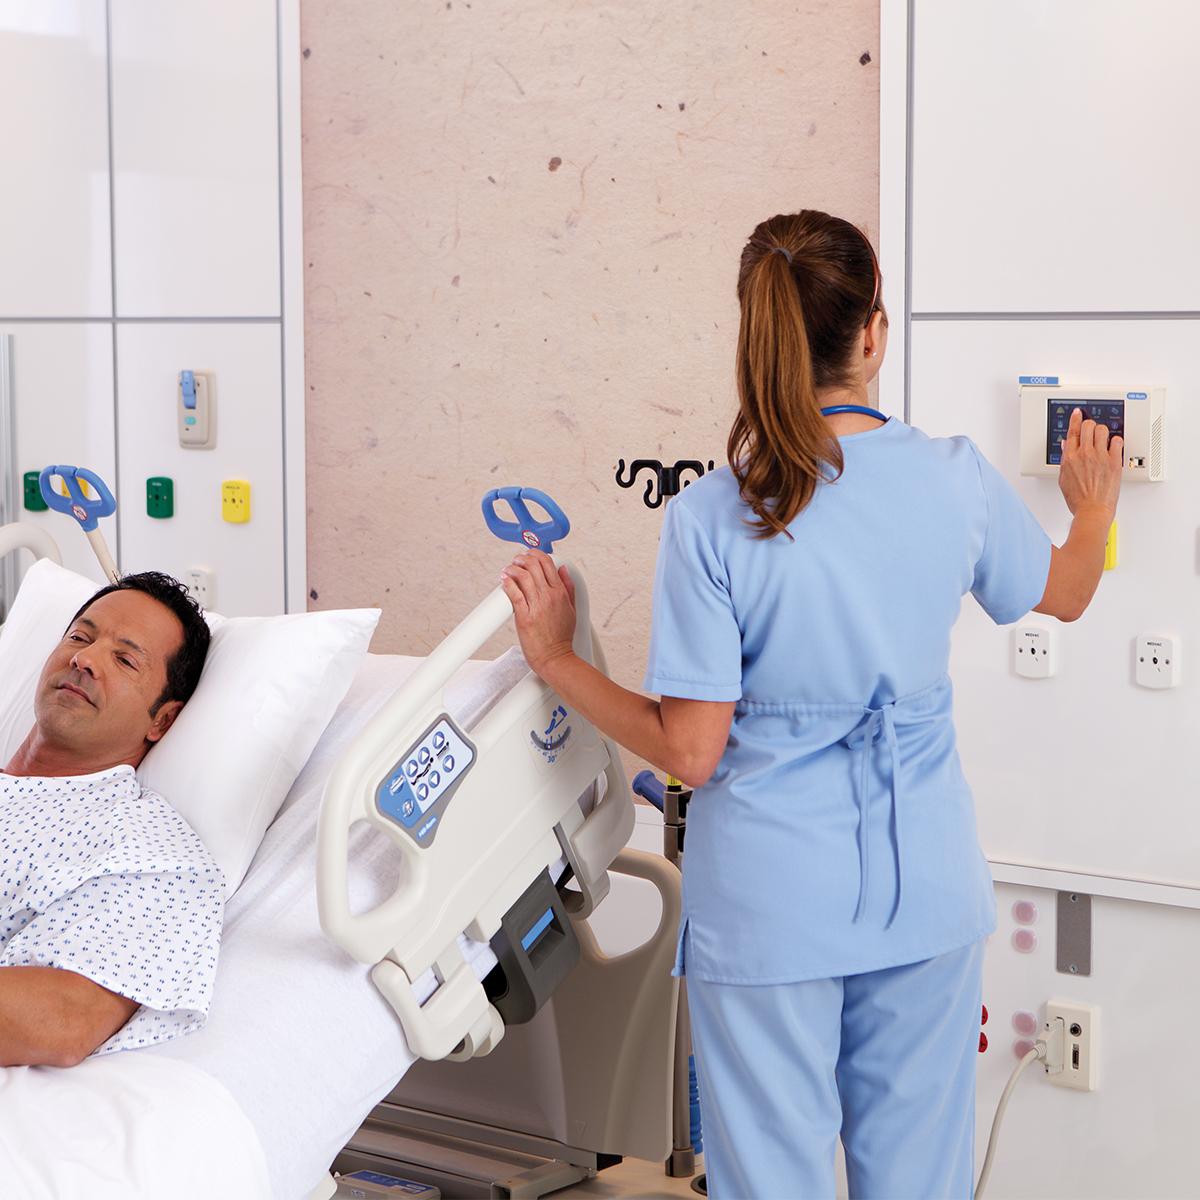 Nurse interacting with a wall-mounted screen next to a patient